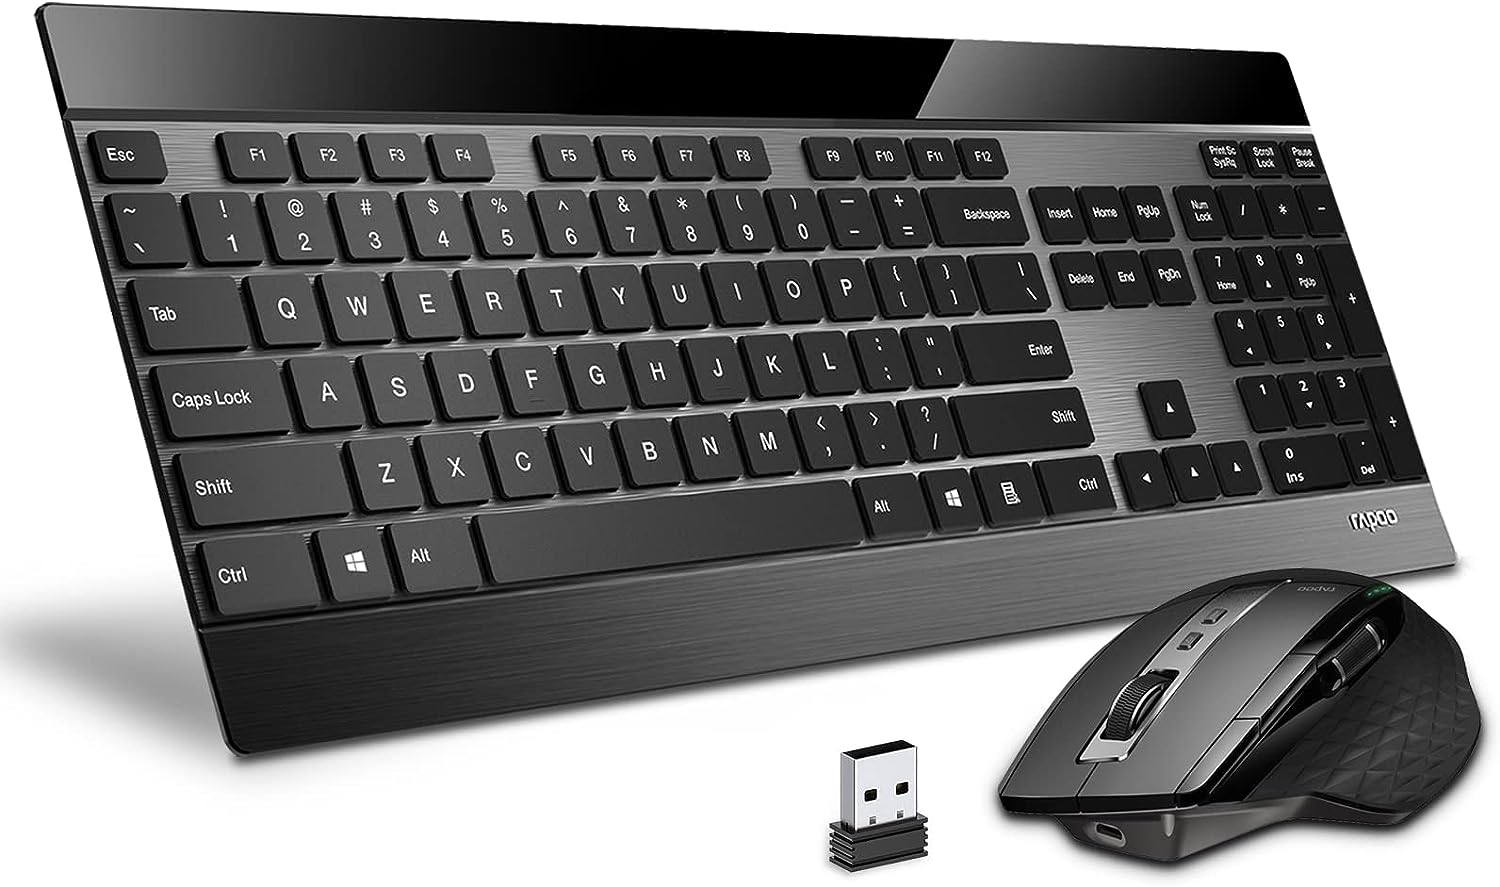 Review of 'RAPOO Wireless Keyboard and Laser Mouse Combo, Multi Device (Bluetooth 4.0+3.0+2.4G) Keyboard and Mouse Set, Ultra-Slim Computer Keyboard Compact Design'